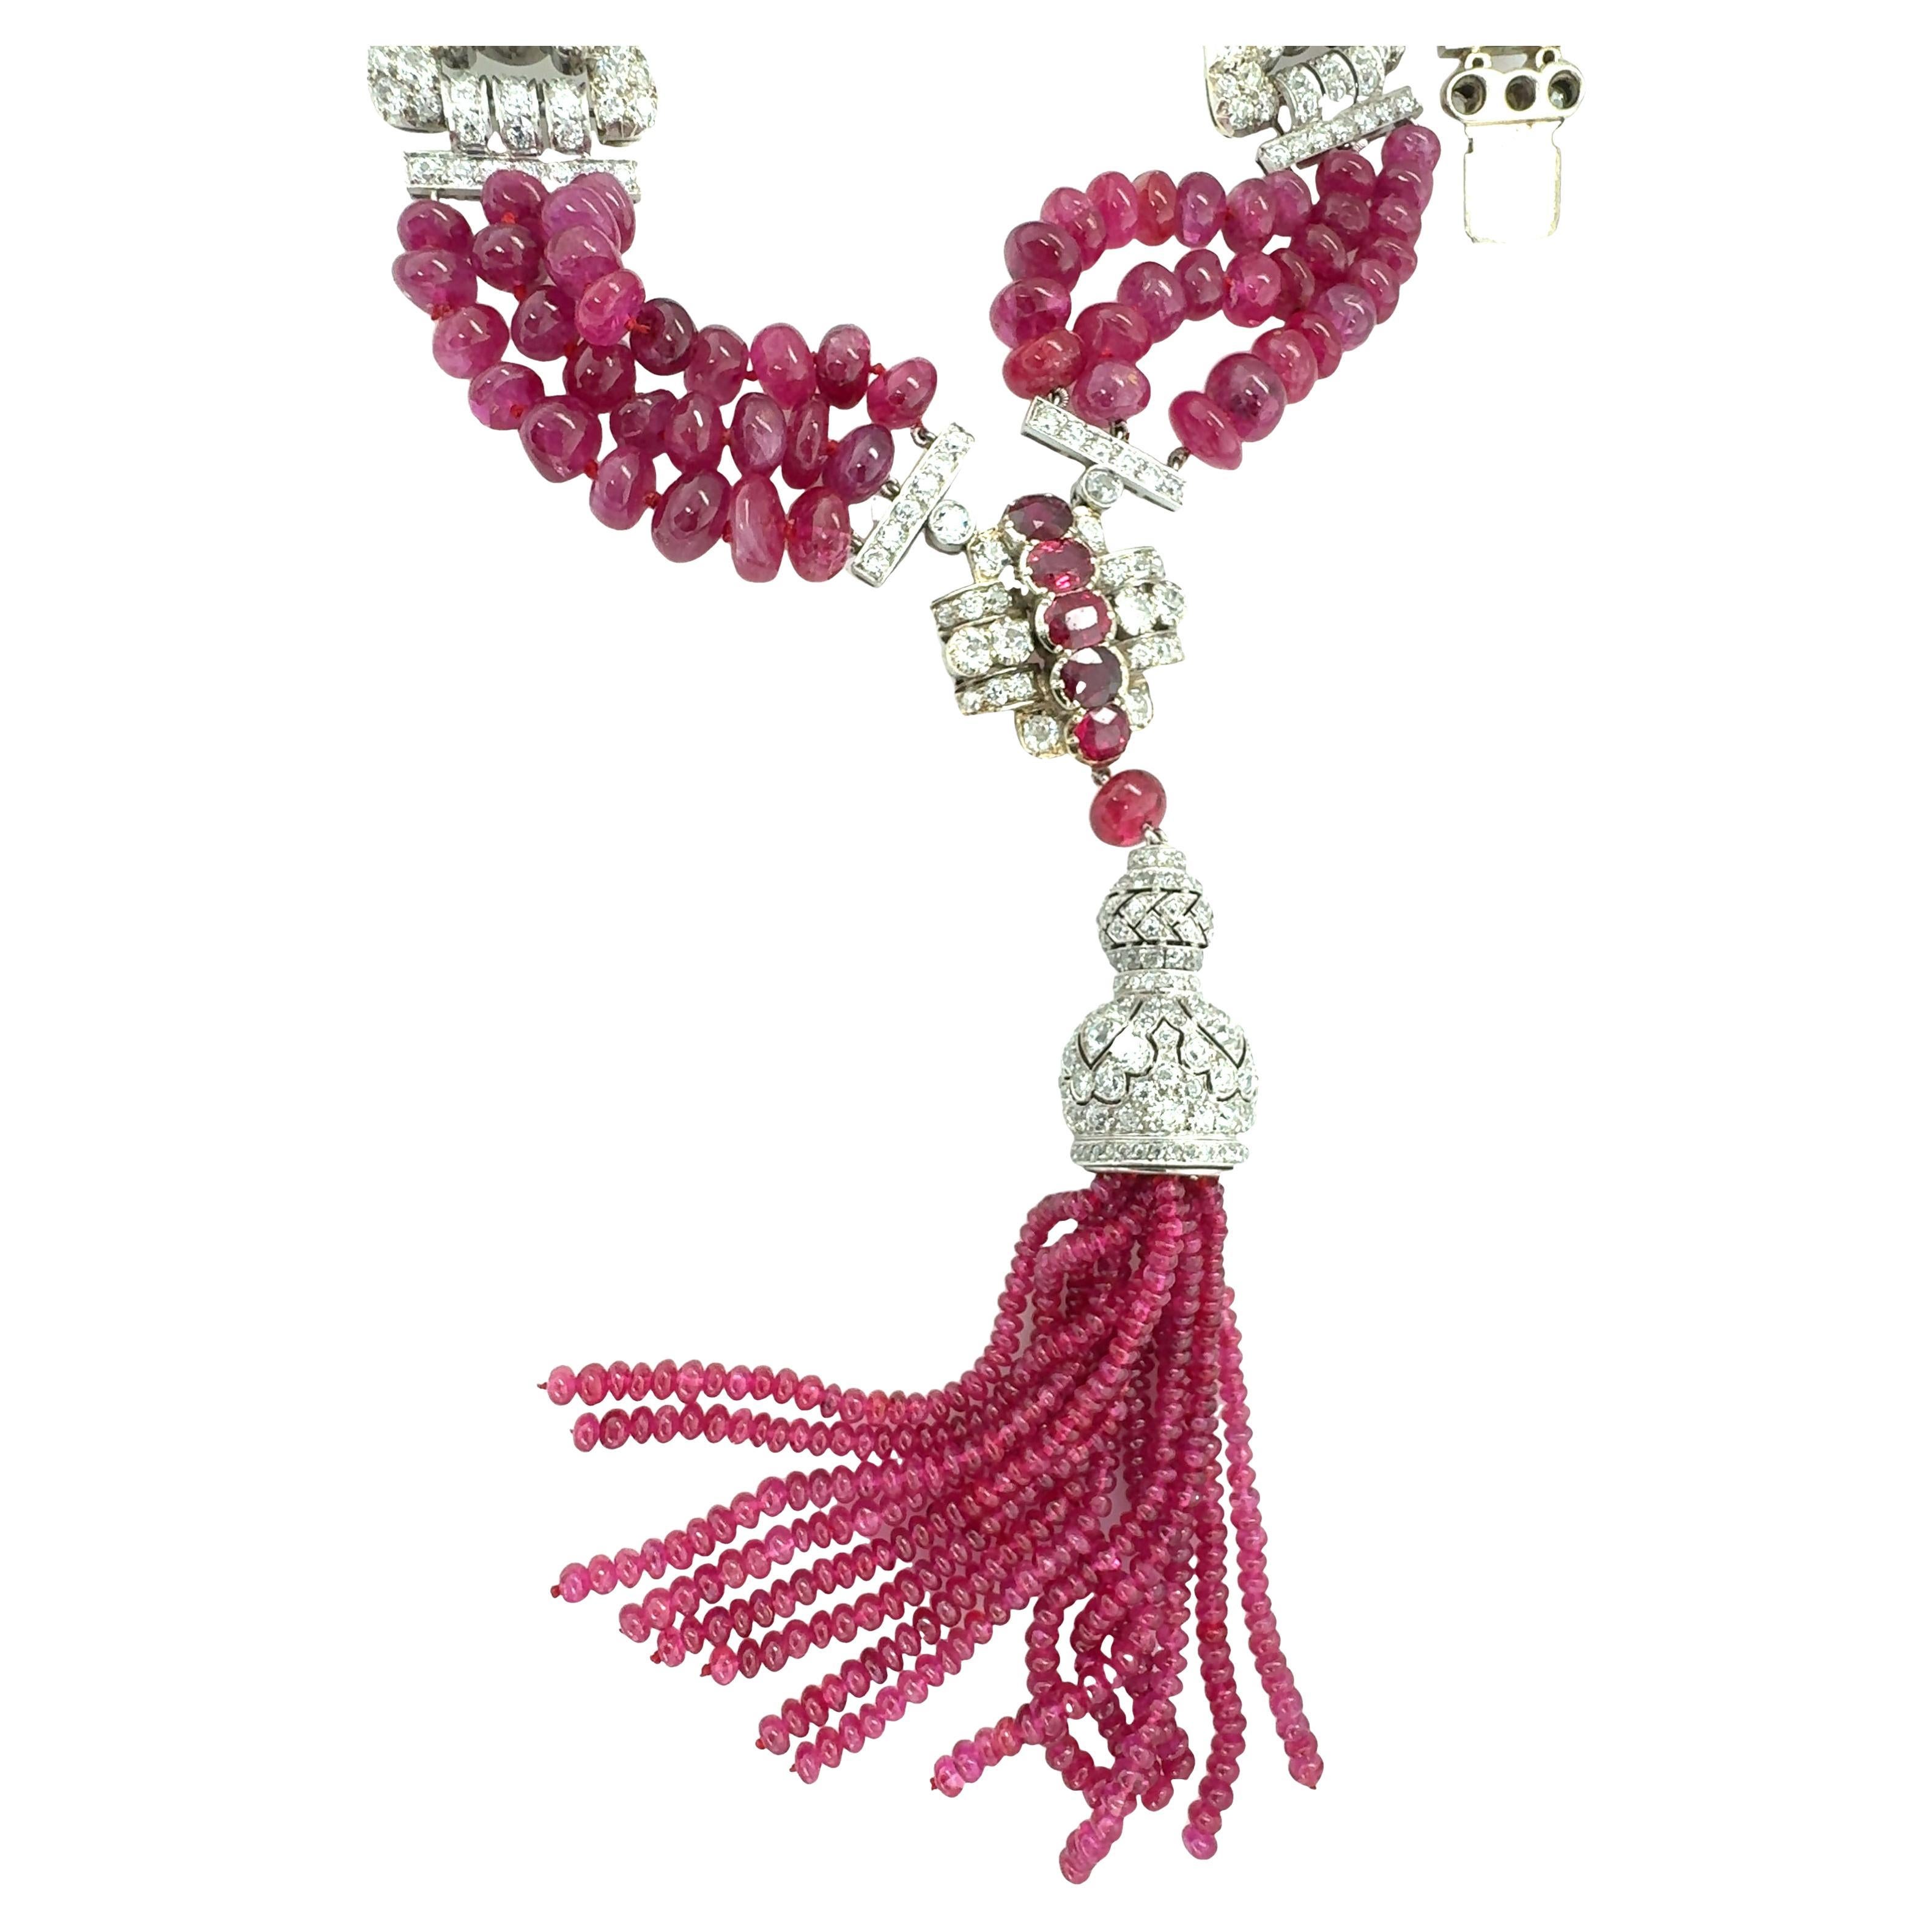 One Art Deco triple strand diamond and ruby bead tassle necklace / pendant set in platinum and 18k white gold by Tiffany & Co.  Featuring old European cut and old mine cut diamonds totaling 20.32 ct. with I-J-K color and VS-1 to SI-1 clarity. Also